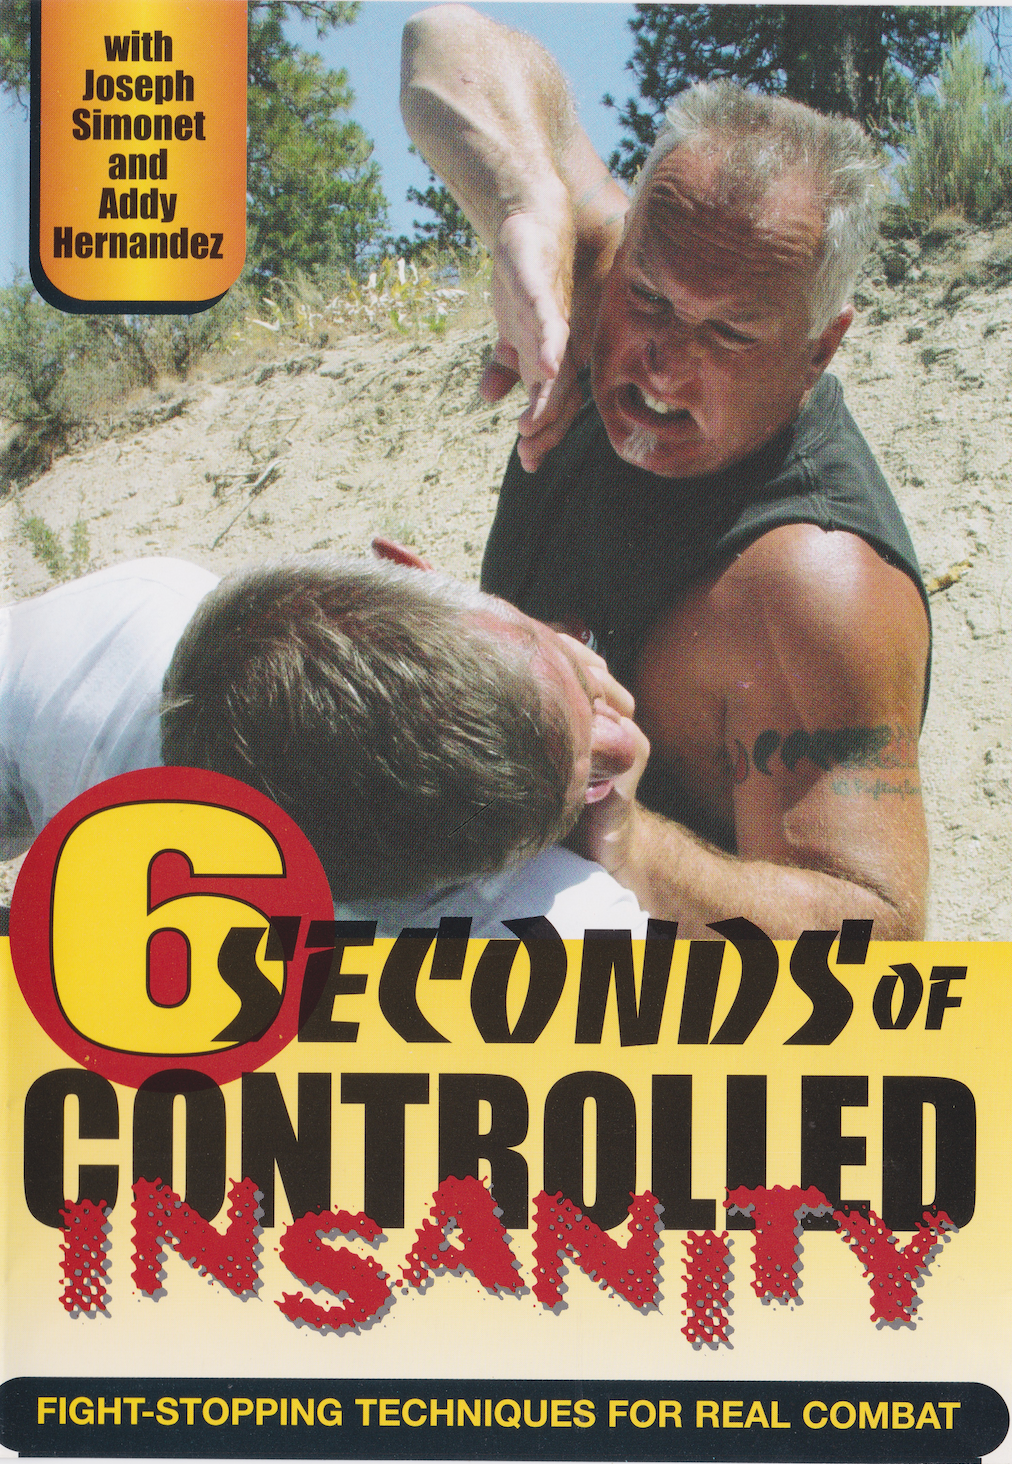 6 Seconds of Controlled Insanity DVD by Joseph Simonet (Preowned)